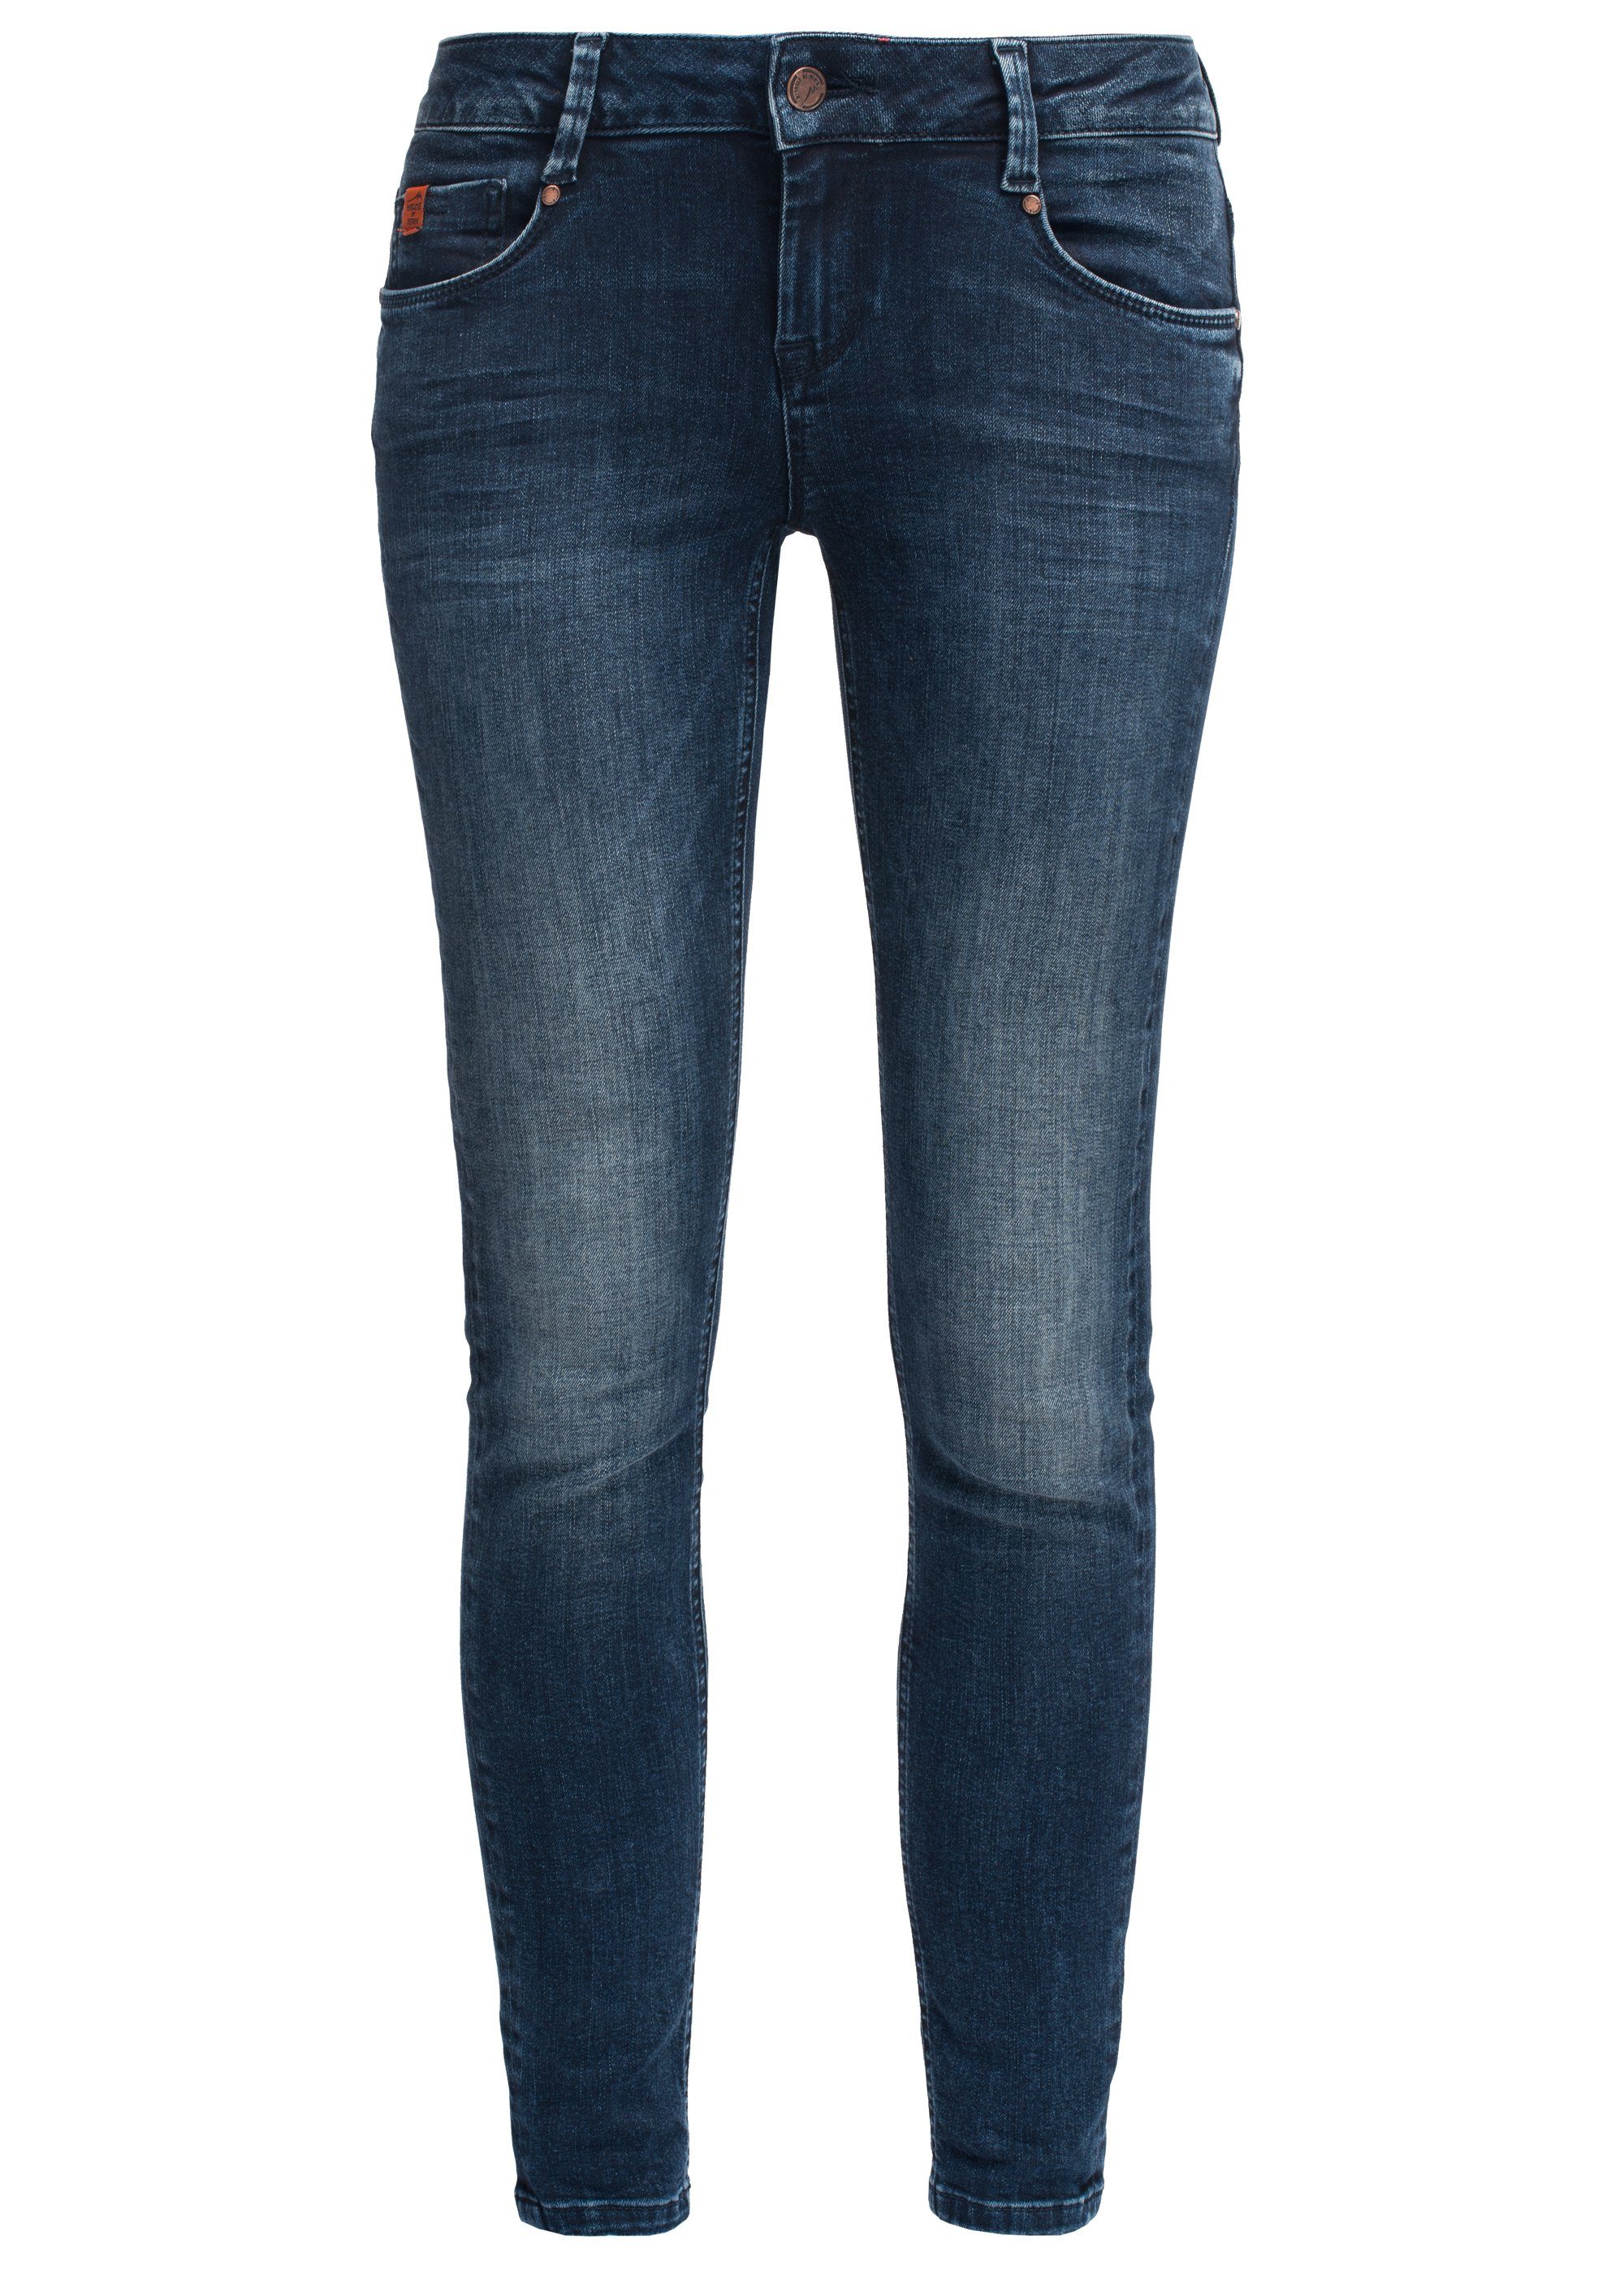 Miracle of Denim Stretch-Jeans MOD JEANS SINA sirus blue WI19-2015.2746